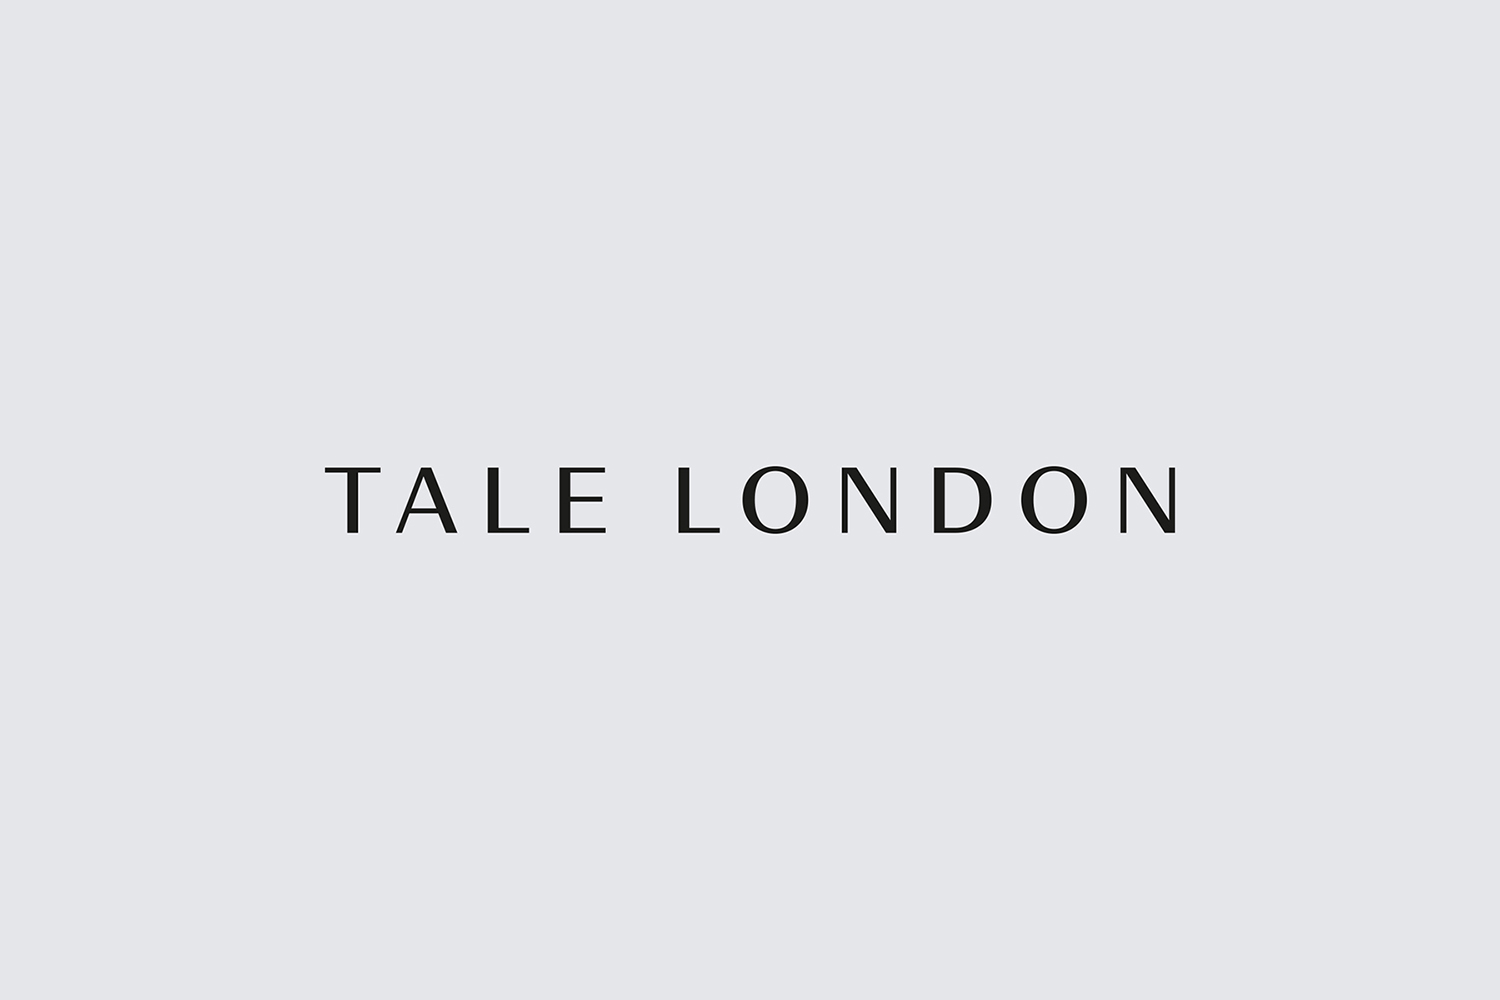 Logotype design by Two Times Elliott for architecture and interior design visualisation studio Tale London